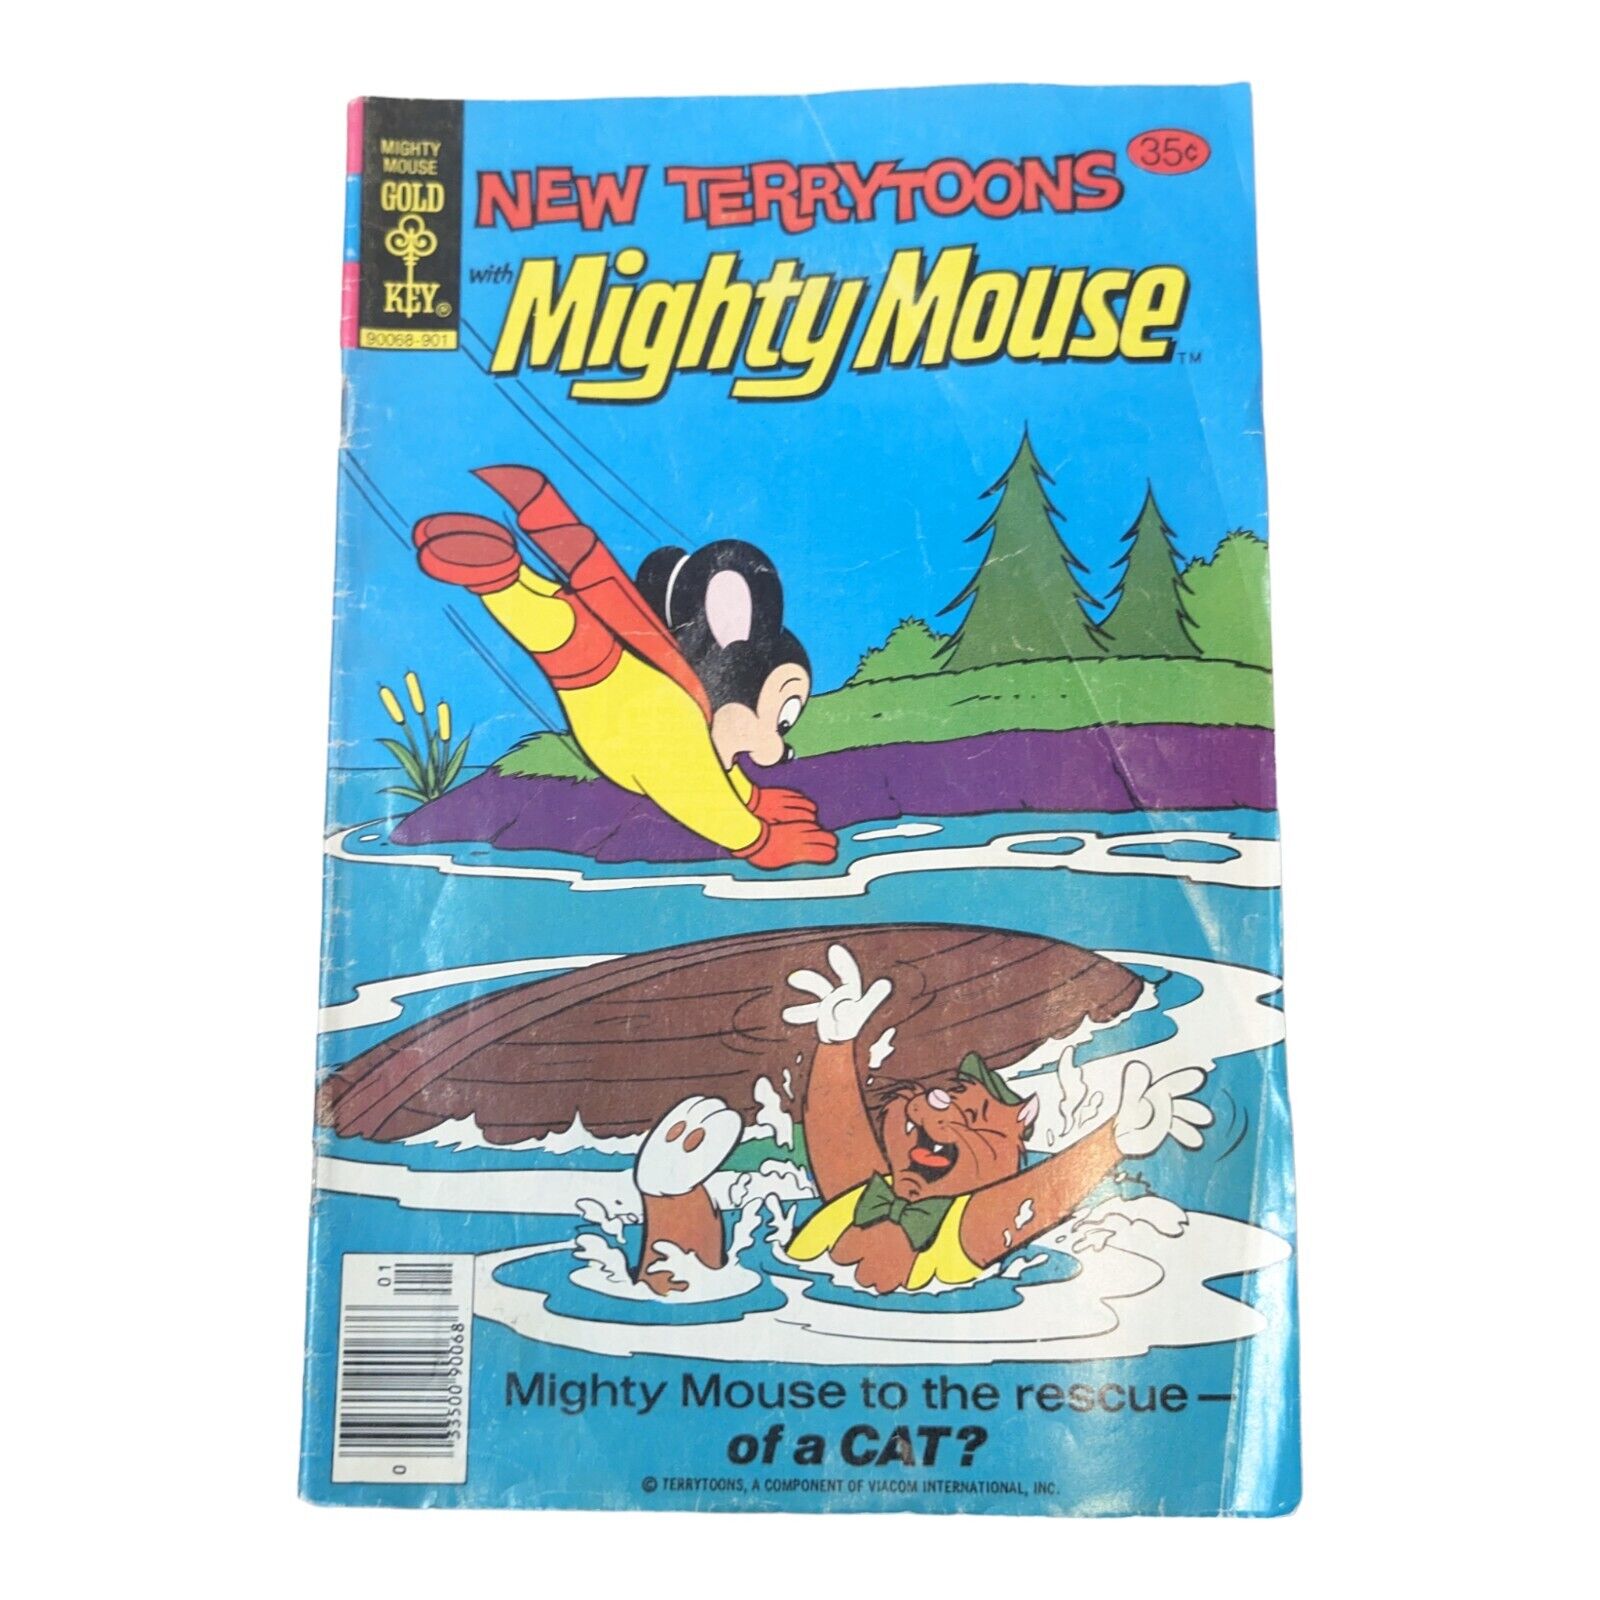 New Terrytoons with Mighty Mouse no. 54 (Whitman) Gold key 1979